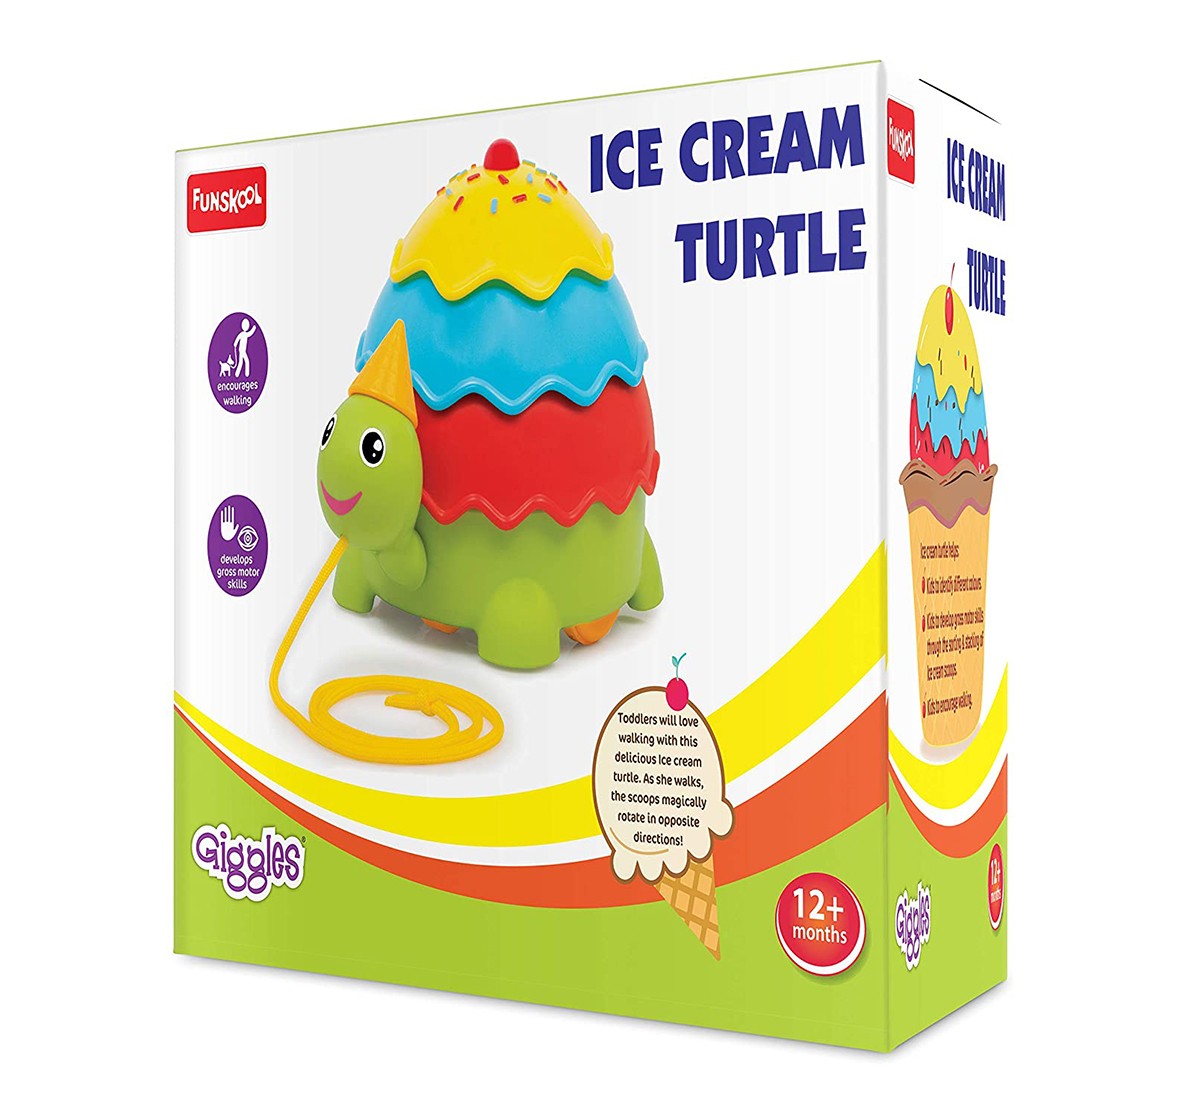 Giggles Ice Cream Turtle Early Learner Toys for Kids age 12M+ 